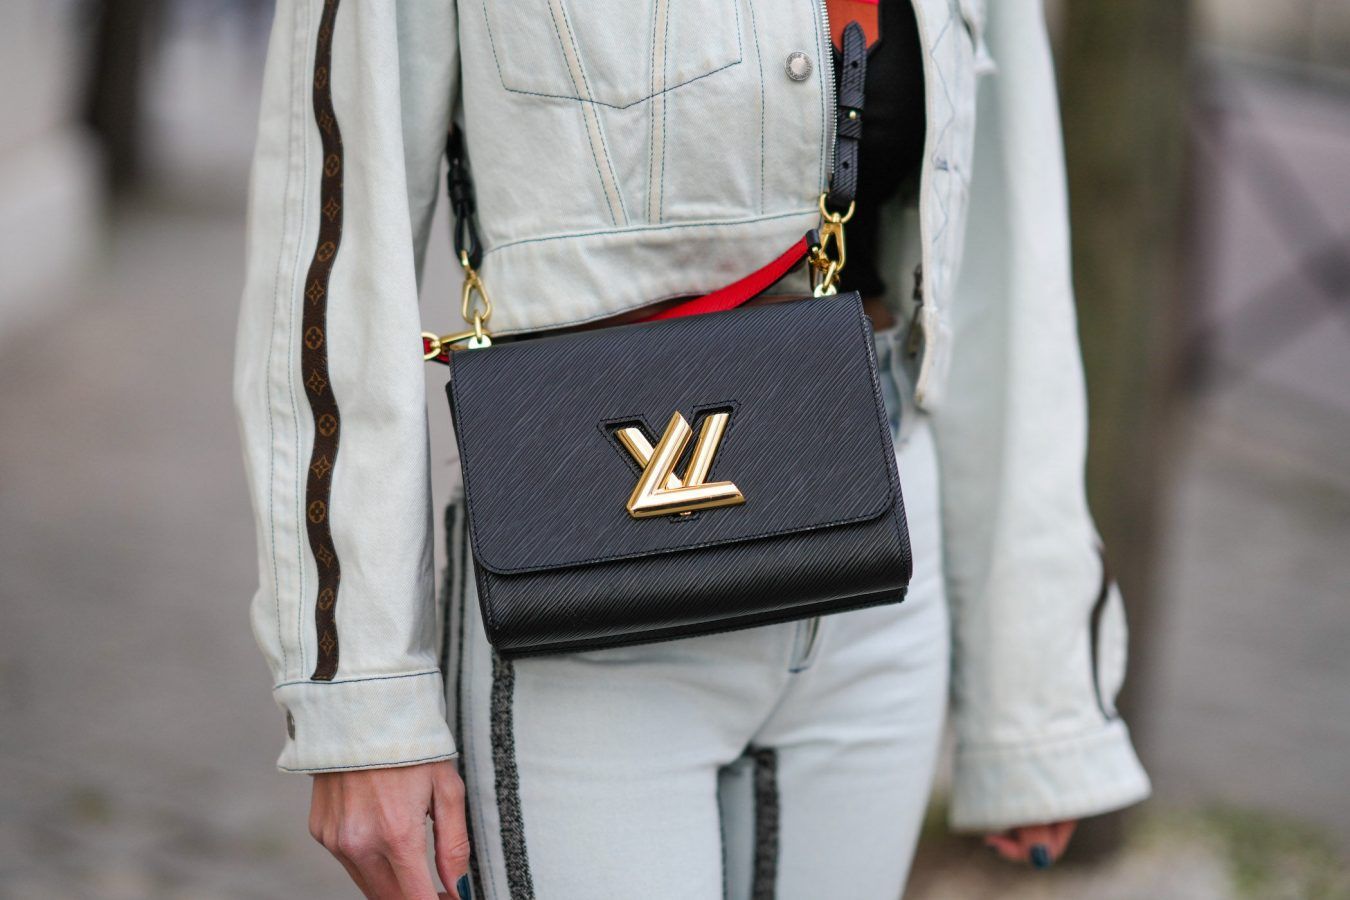 Petite Malle to Neverfull: 13 most popular Louis Vuitton bags to invest in